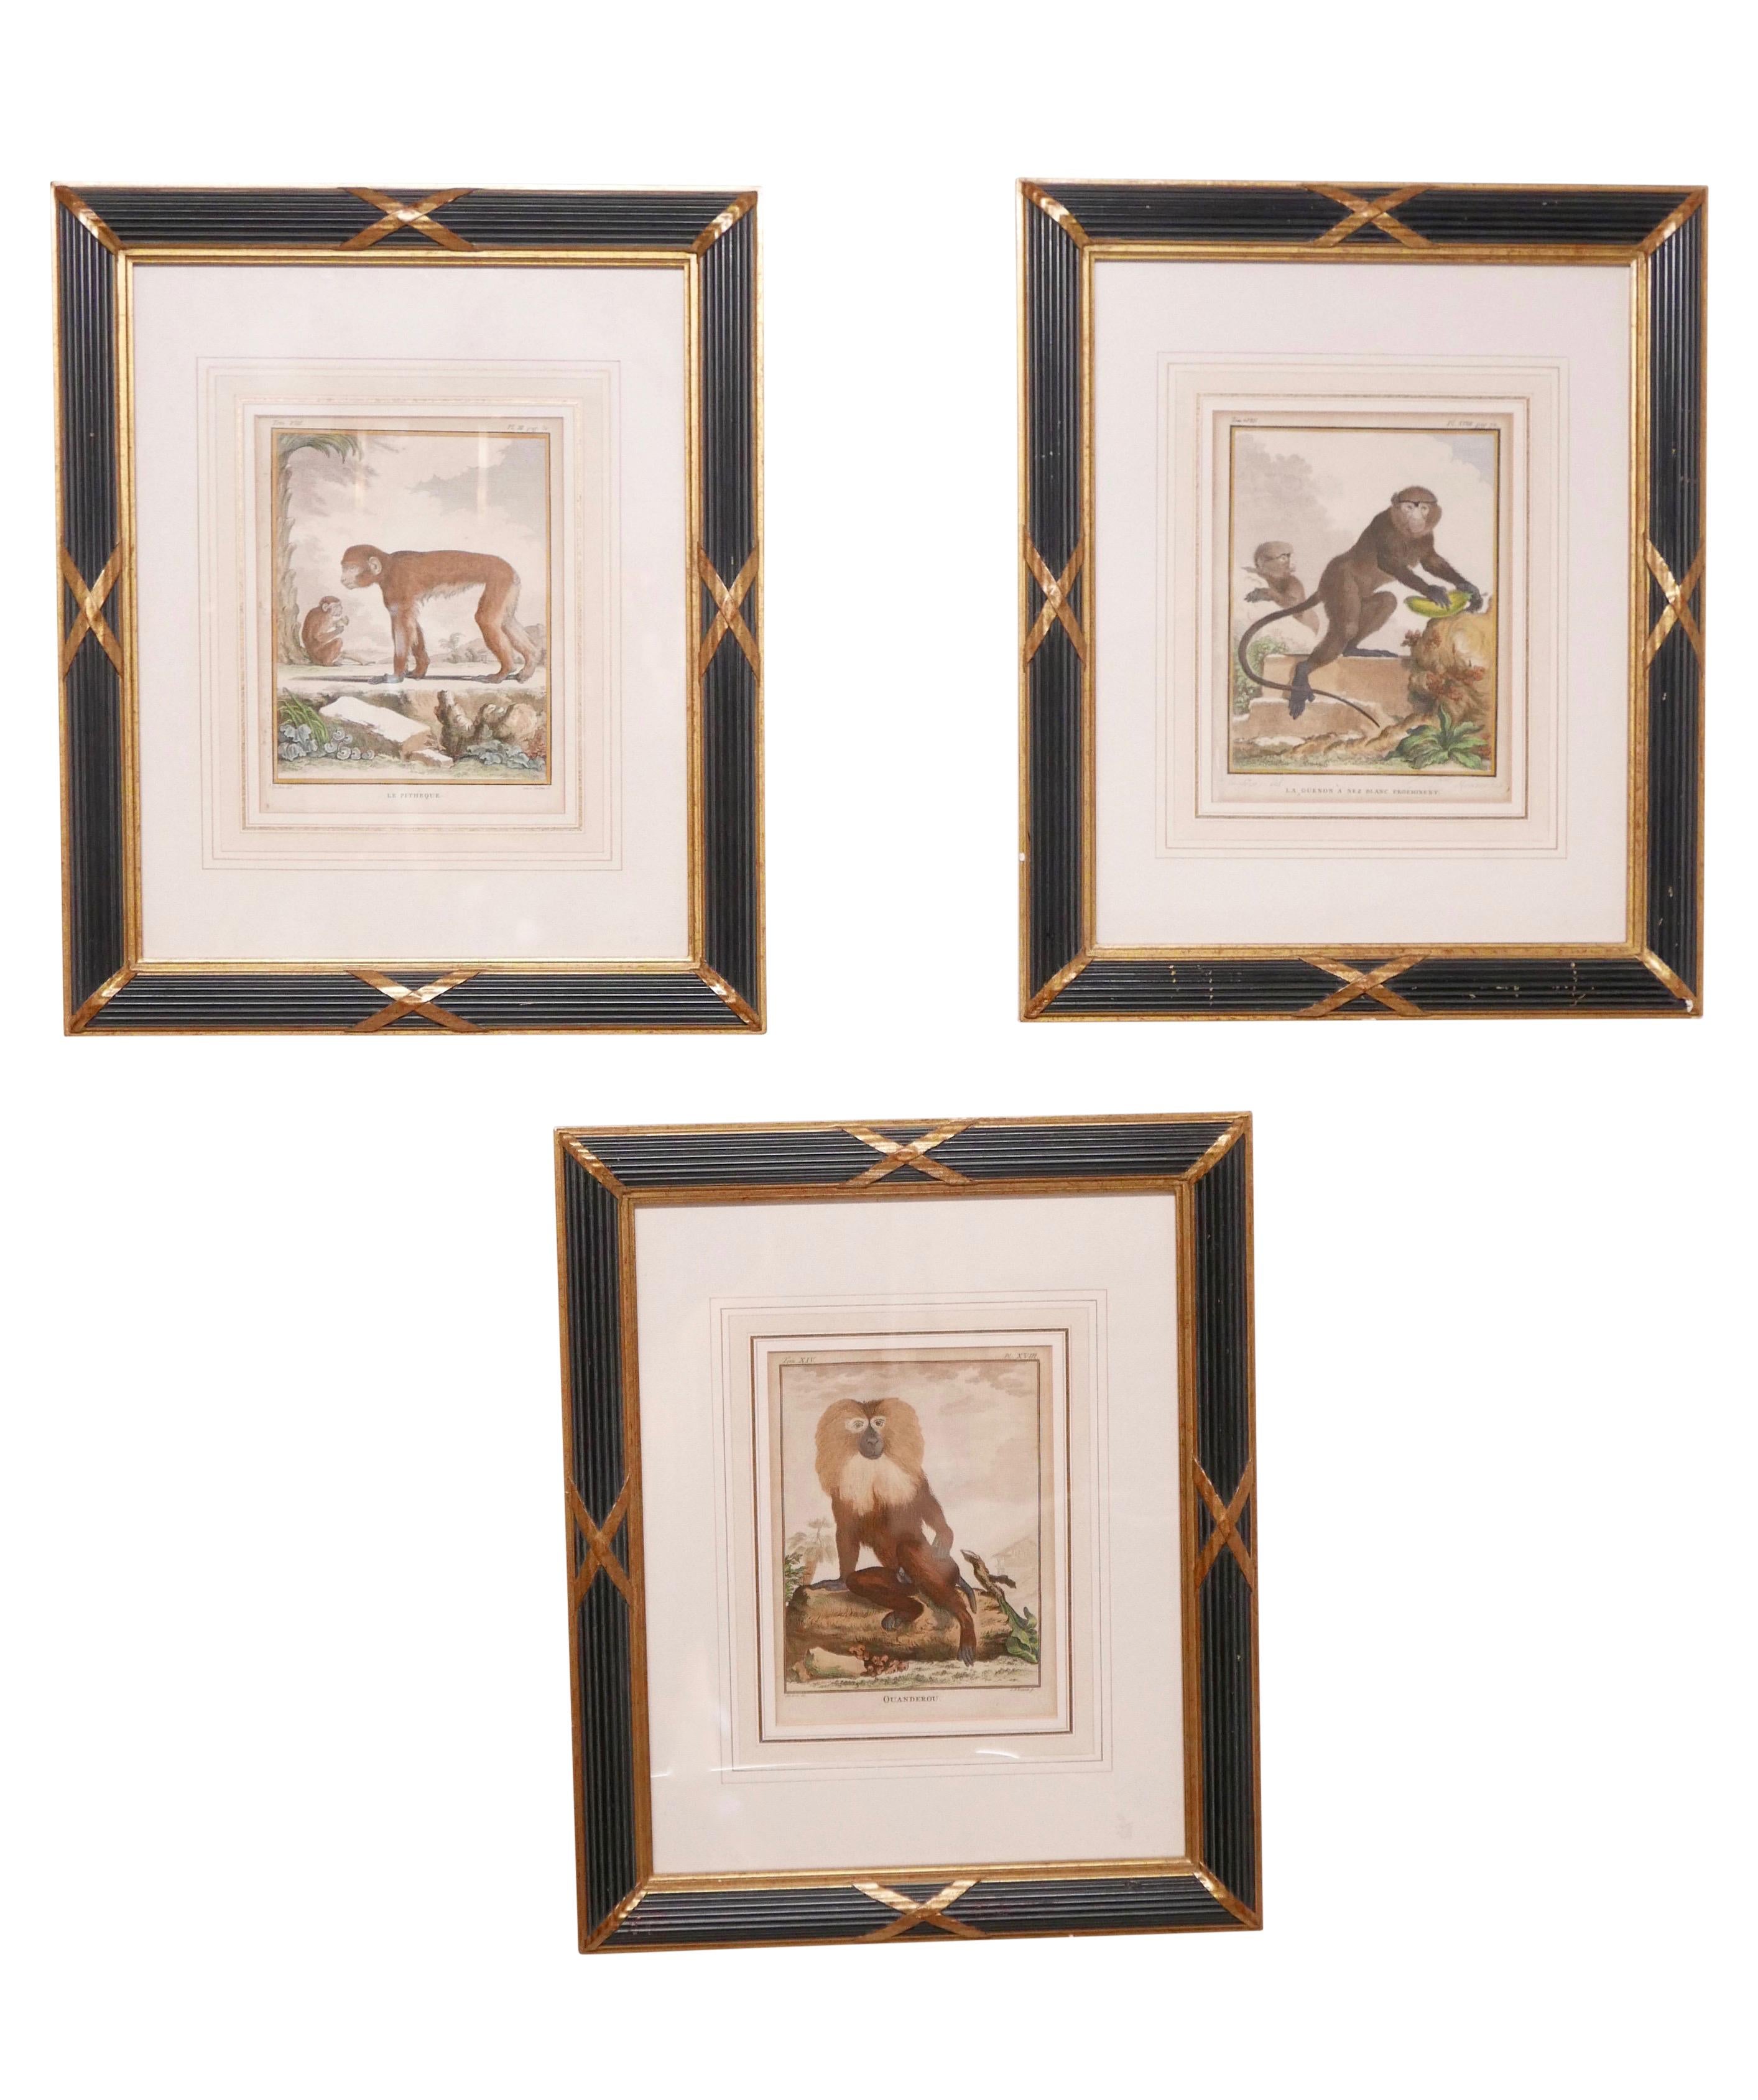 Three Framed Antique Hand Colored Monkey Engravings - Early 19th Century 4